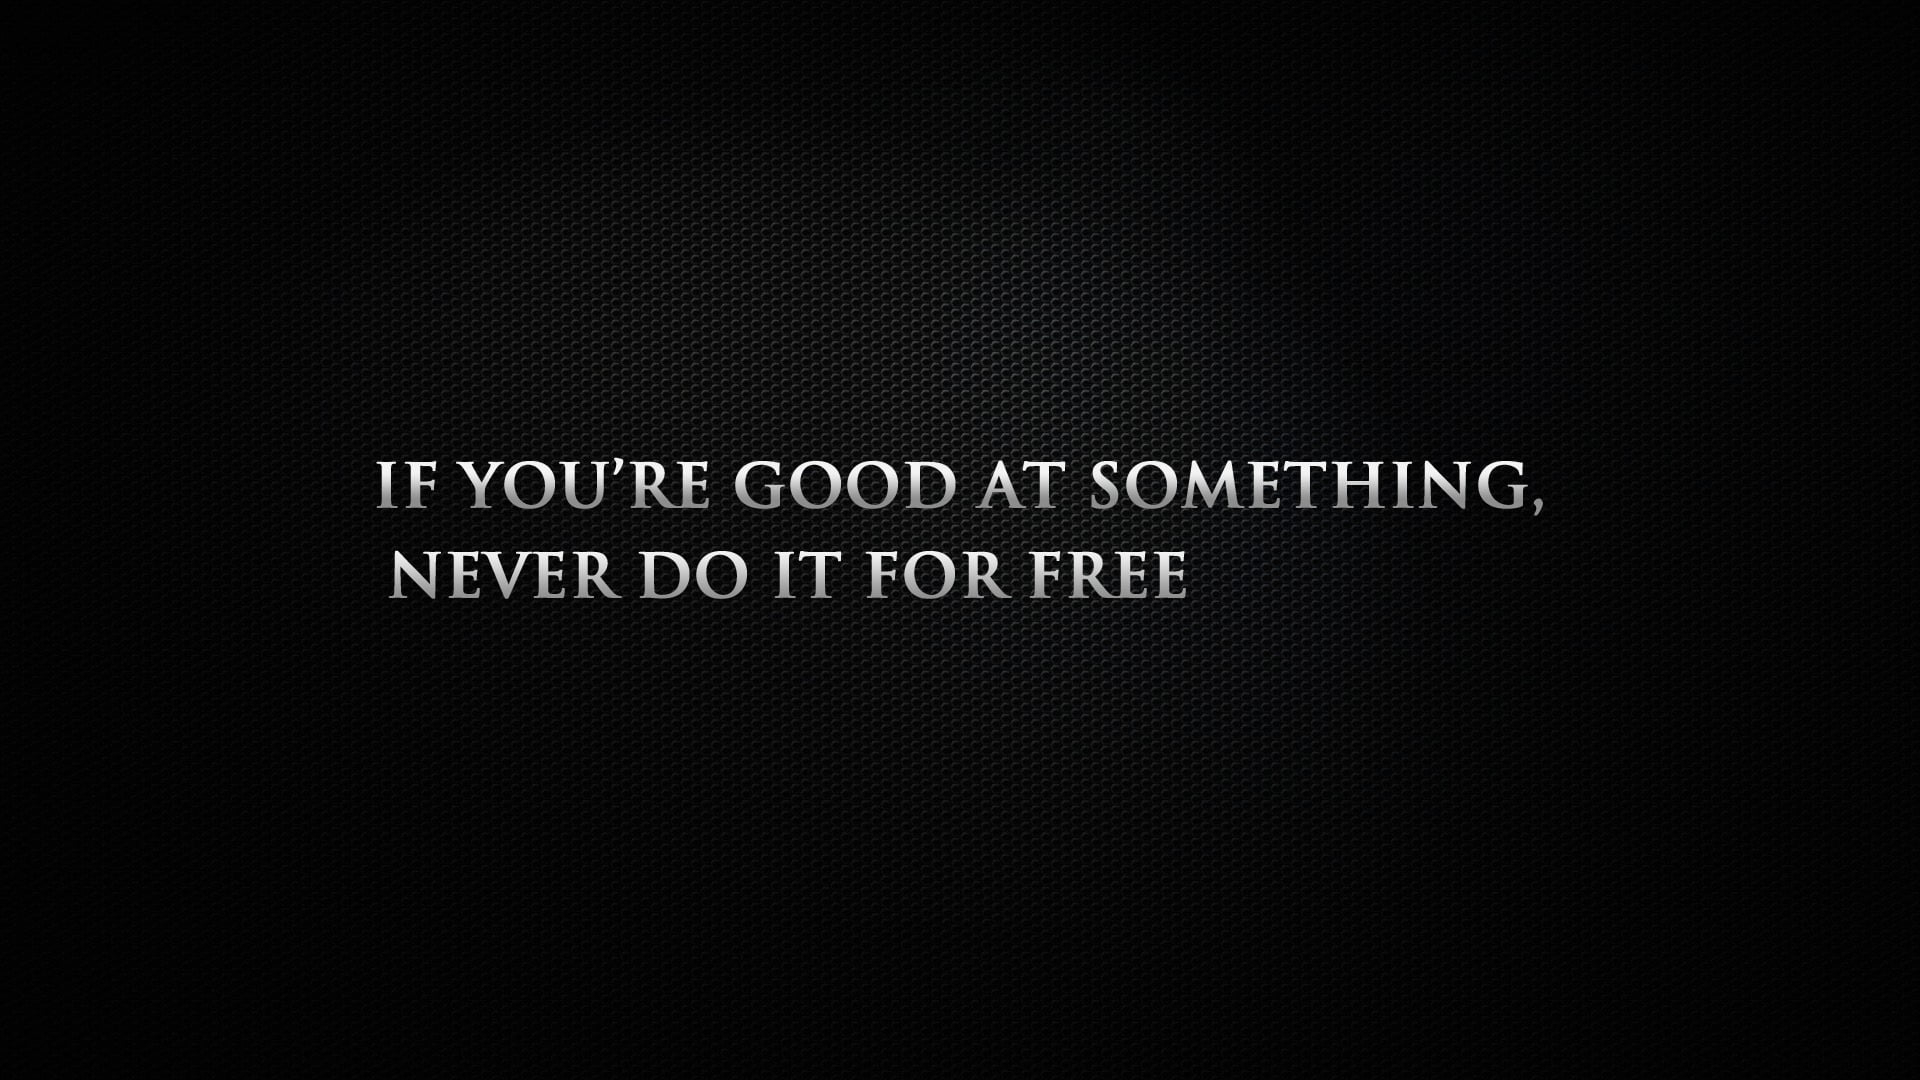 If you're good at something never do it for free wallpaper, digital art, quote, communication